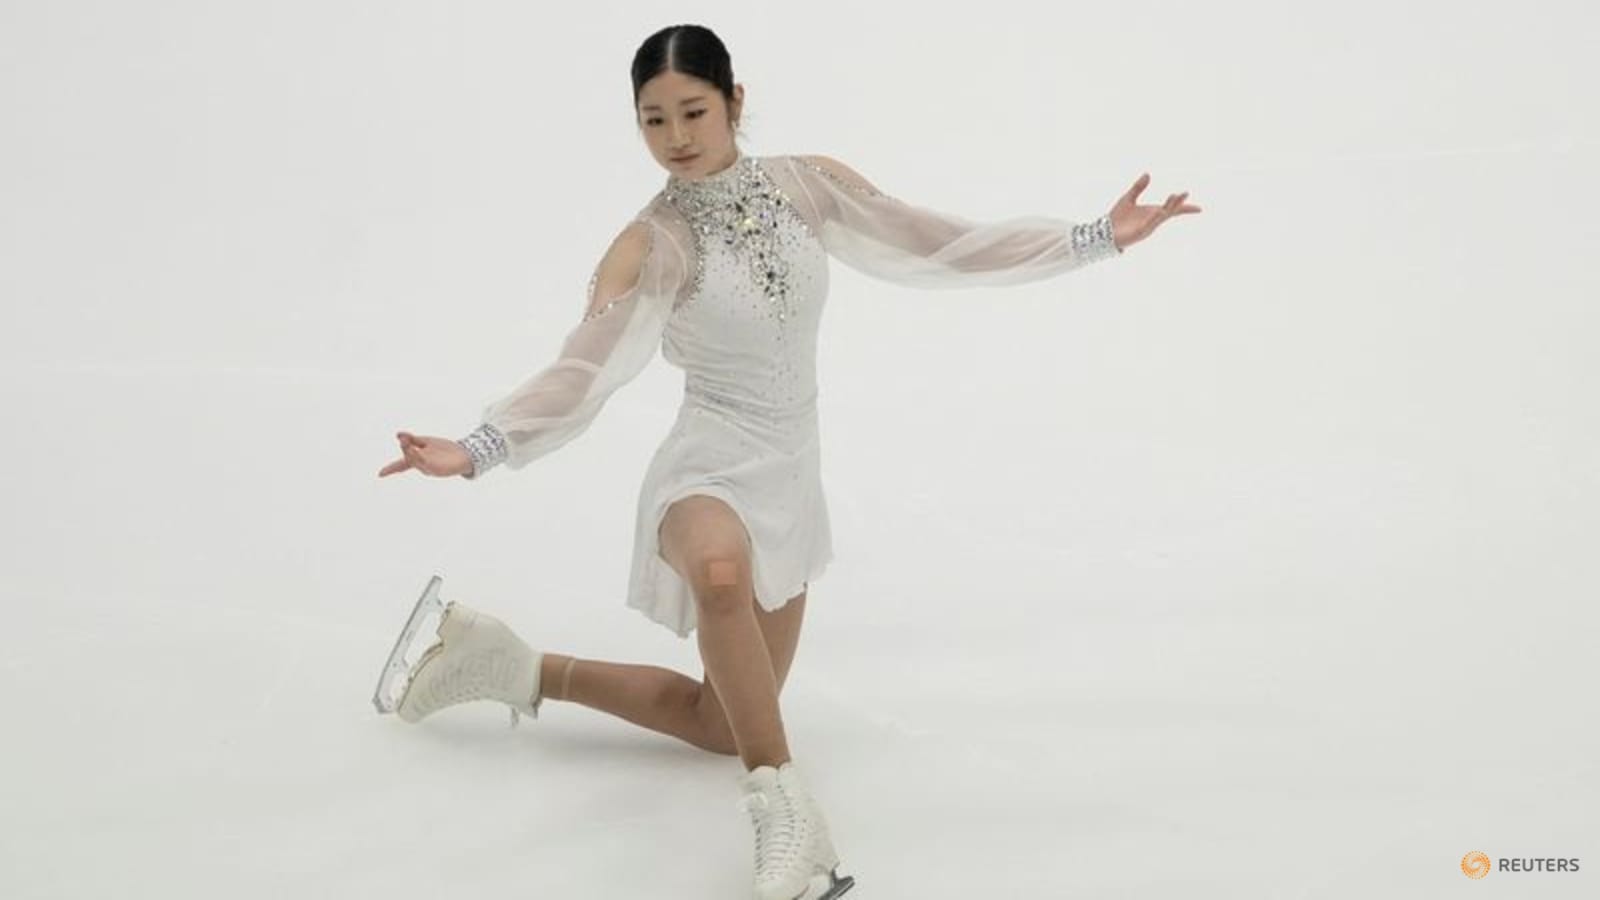 Lee Hae In Wins Four Continents Figure Skating Gold Flipboard 4217